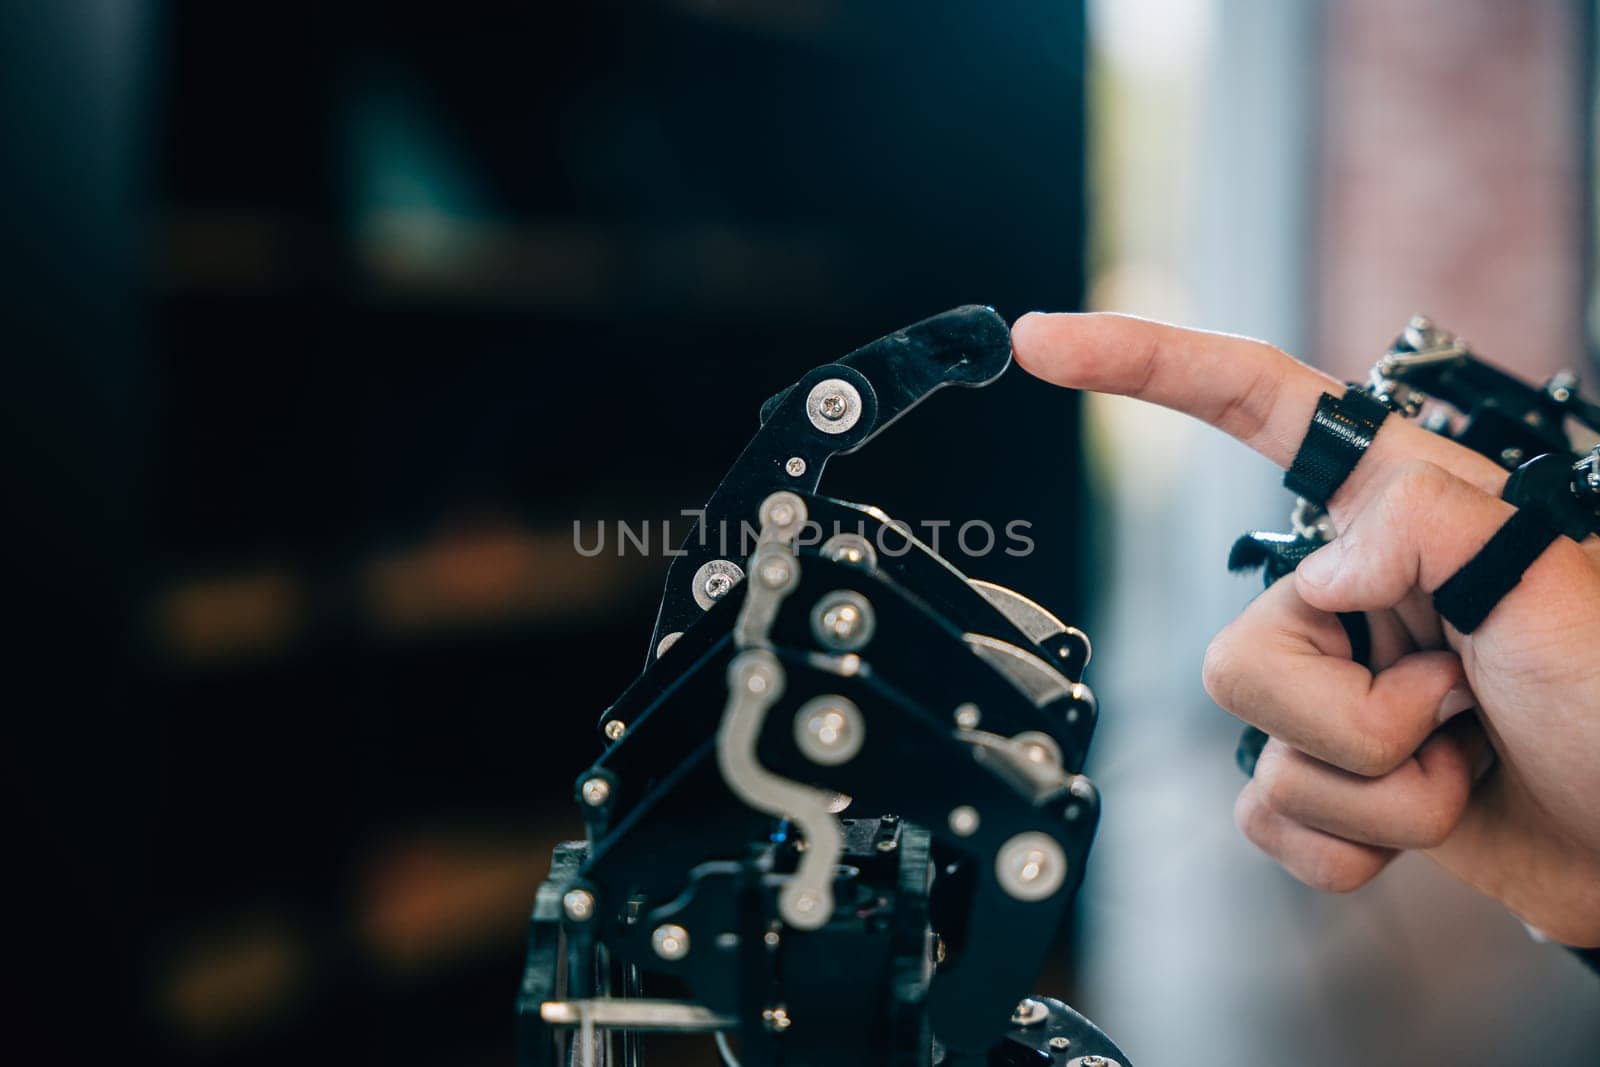 In a technical college a teenage boy tests a robot hand and arm touching fingers for educational skill development. Embracing futuristic AI and human connection in learning. by Sorapop